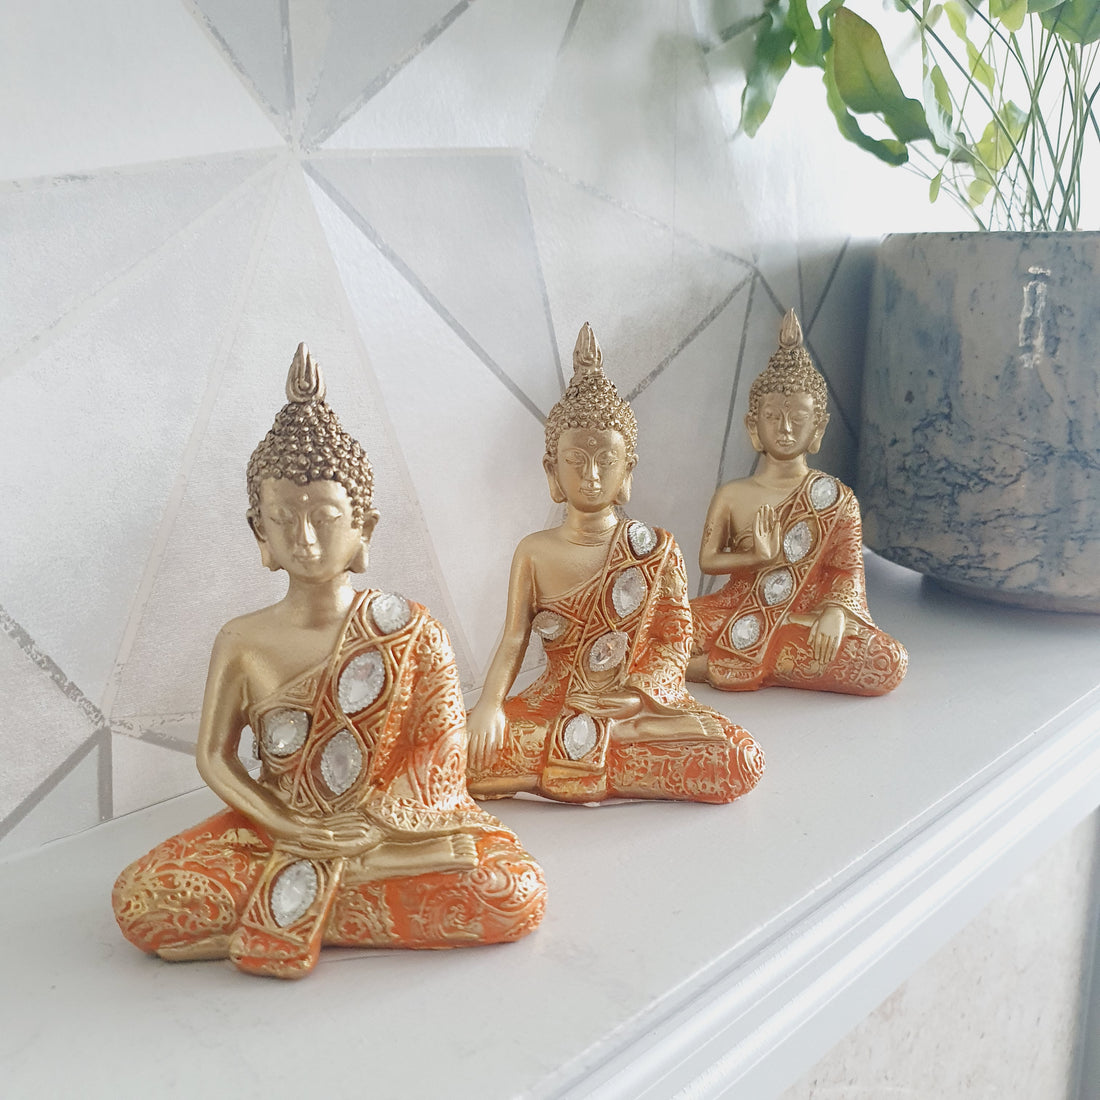 Why have a Buddha Statue in your Home?